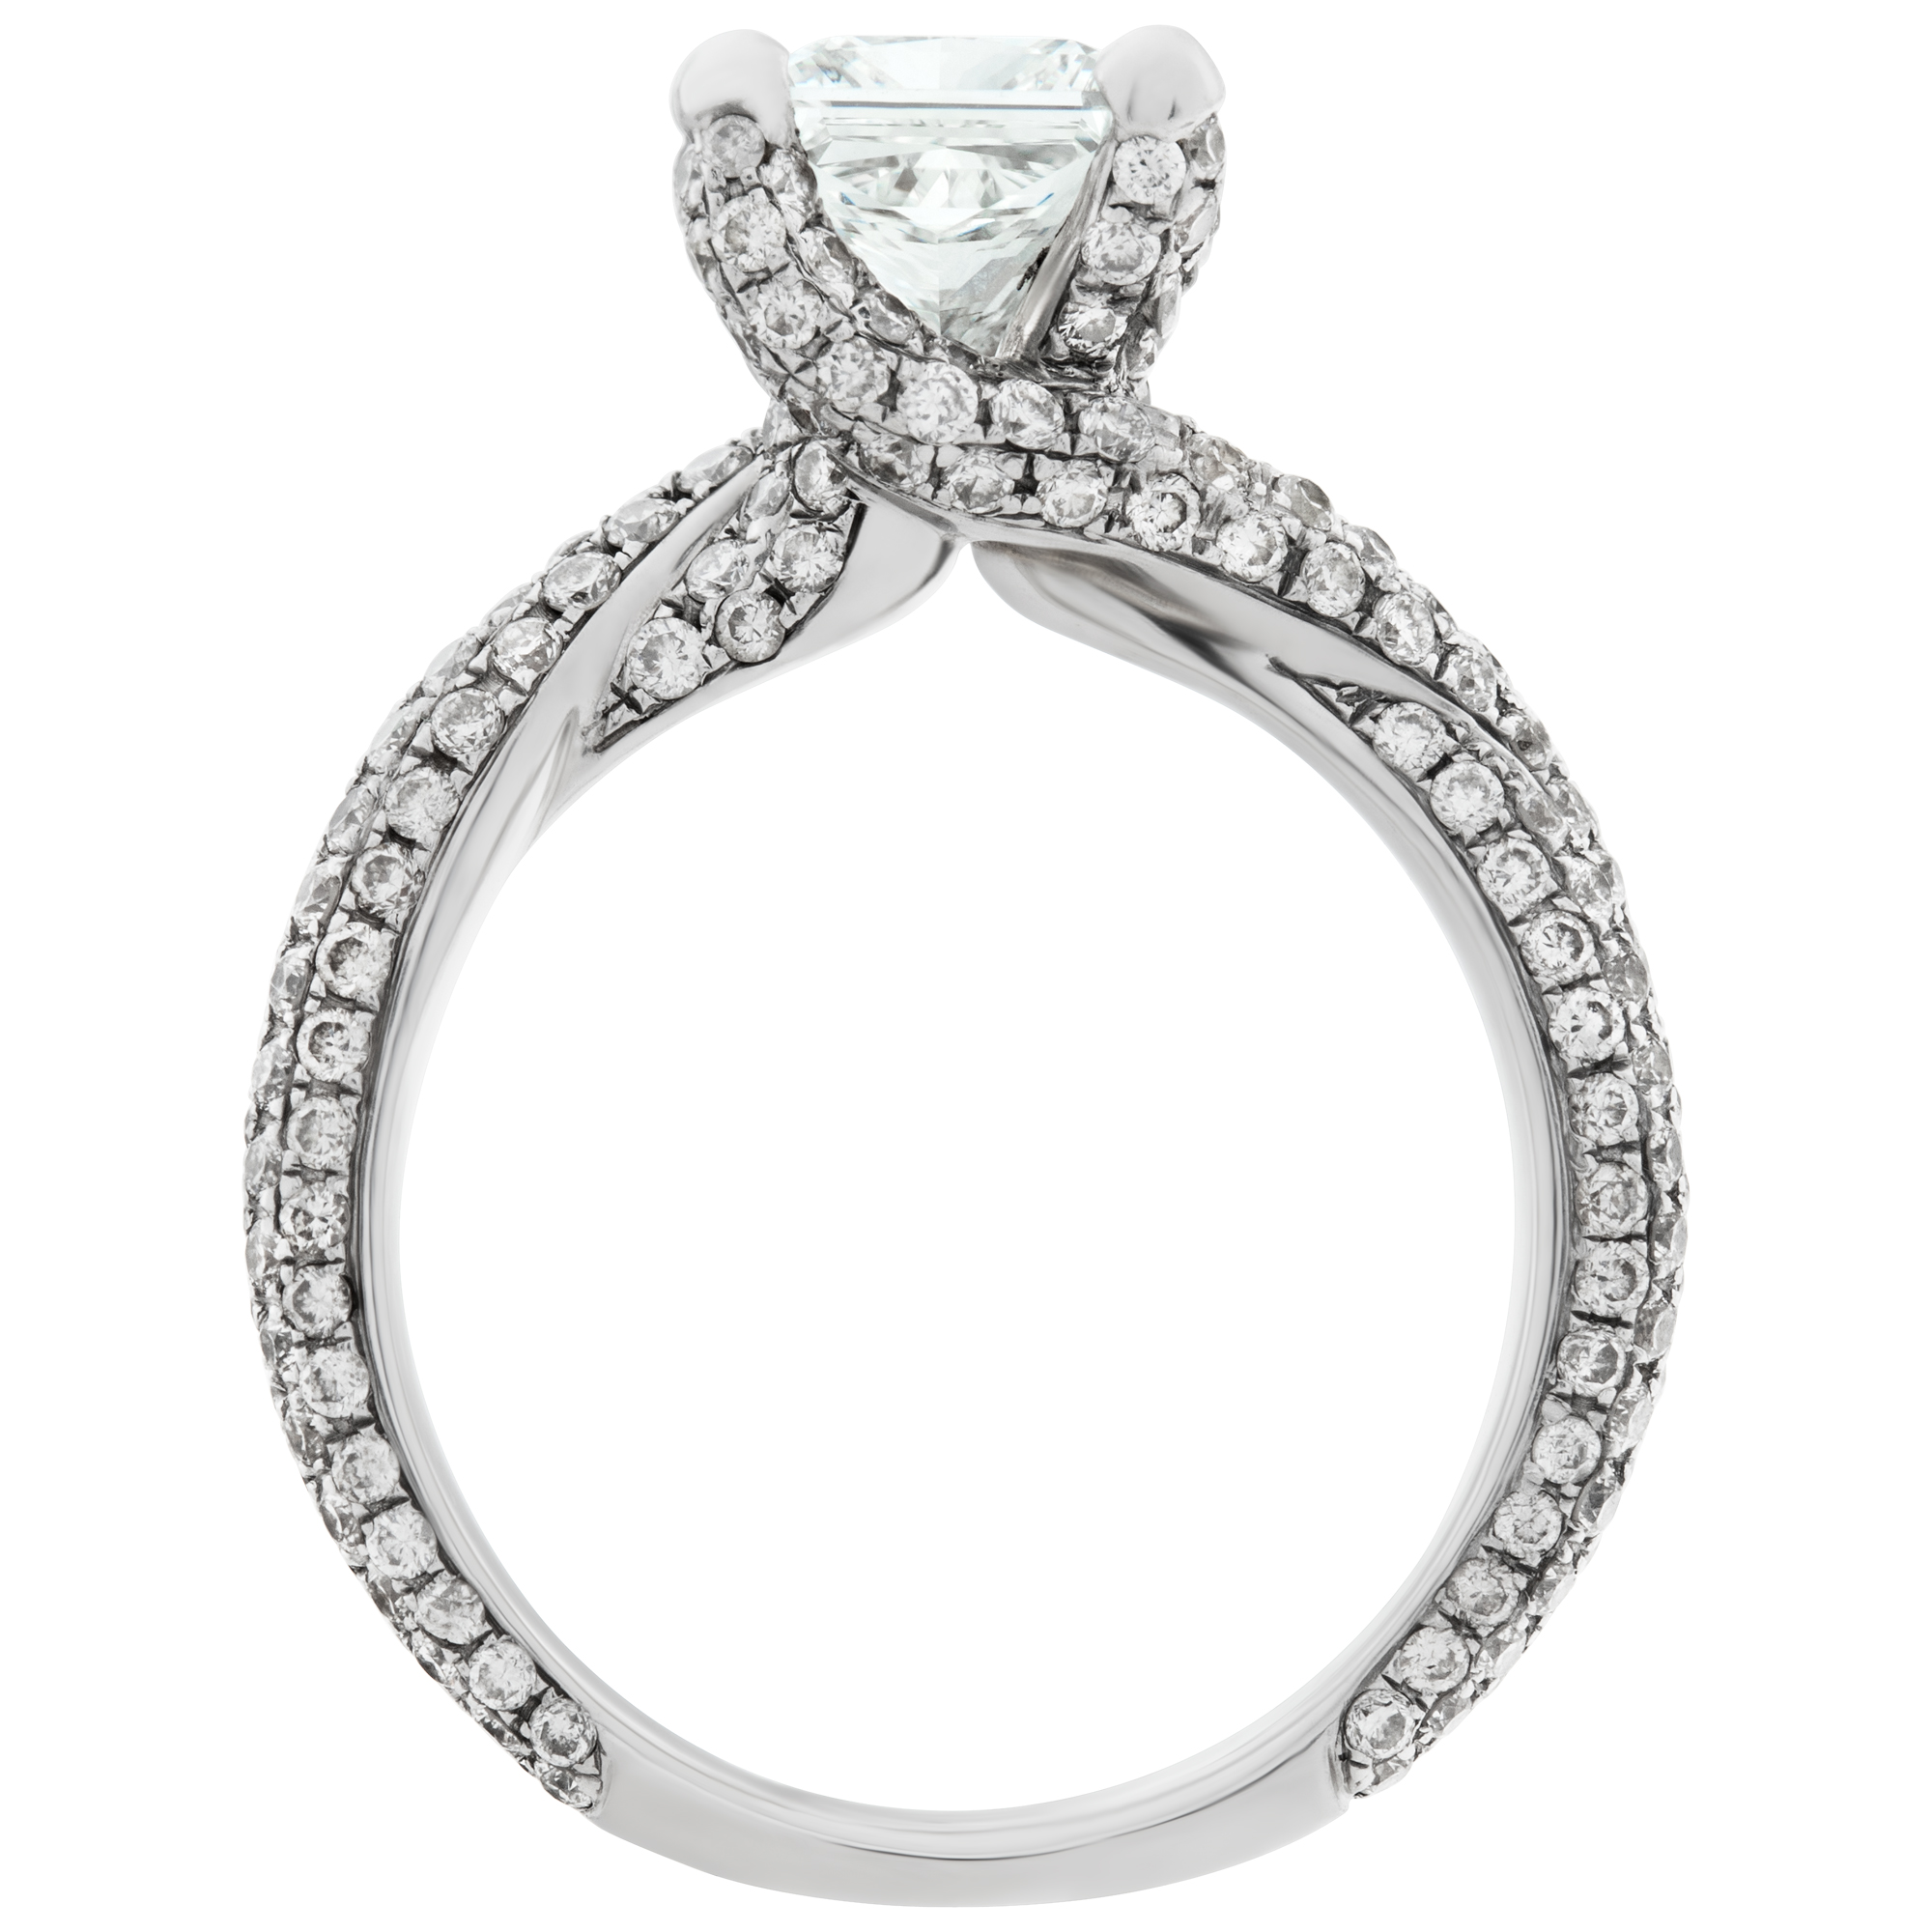 GIA certified rectangular diamond ring 1.53 cts (I Color, VS2 Clarity) set in micro pave diamond 18k white gold. image 3